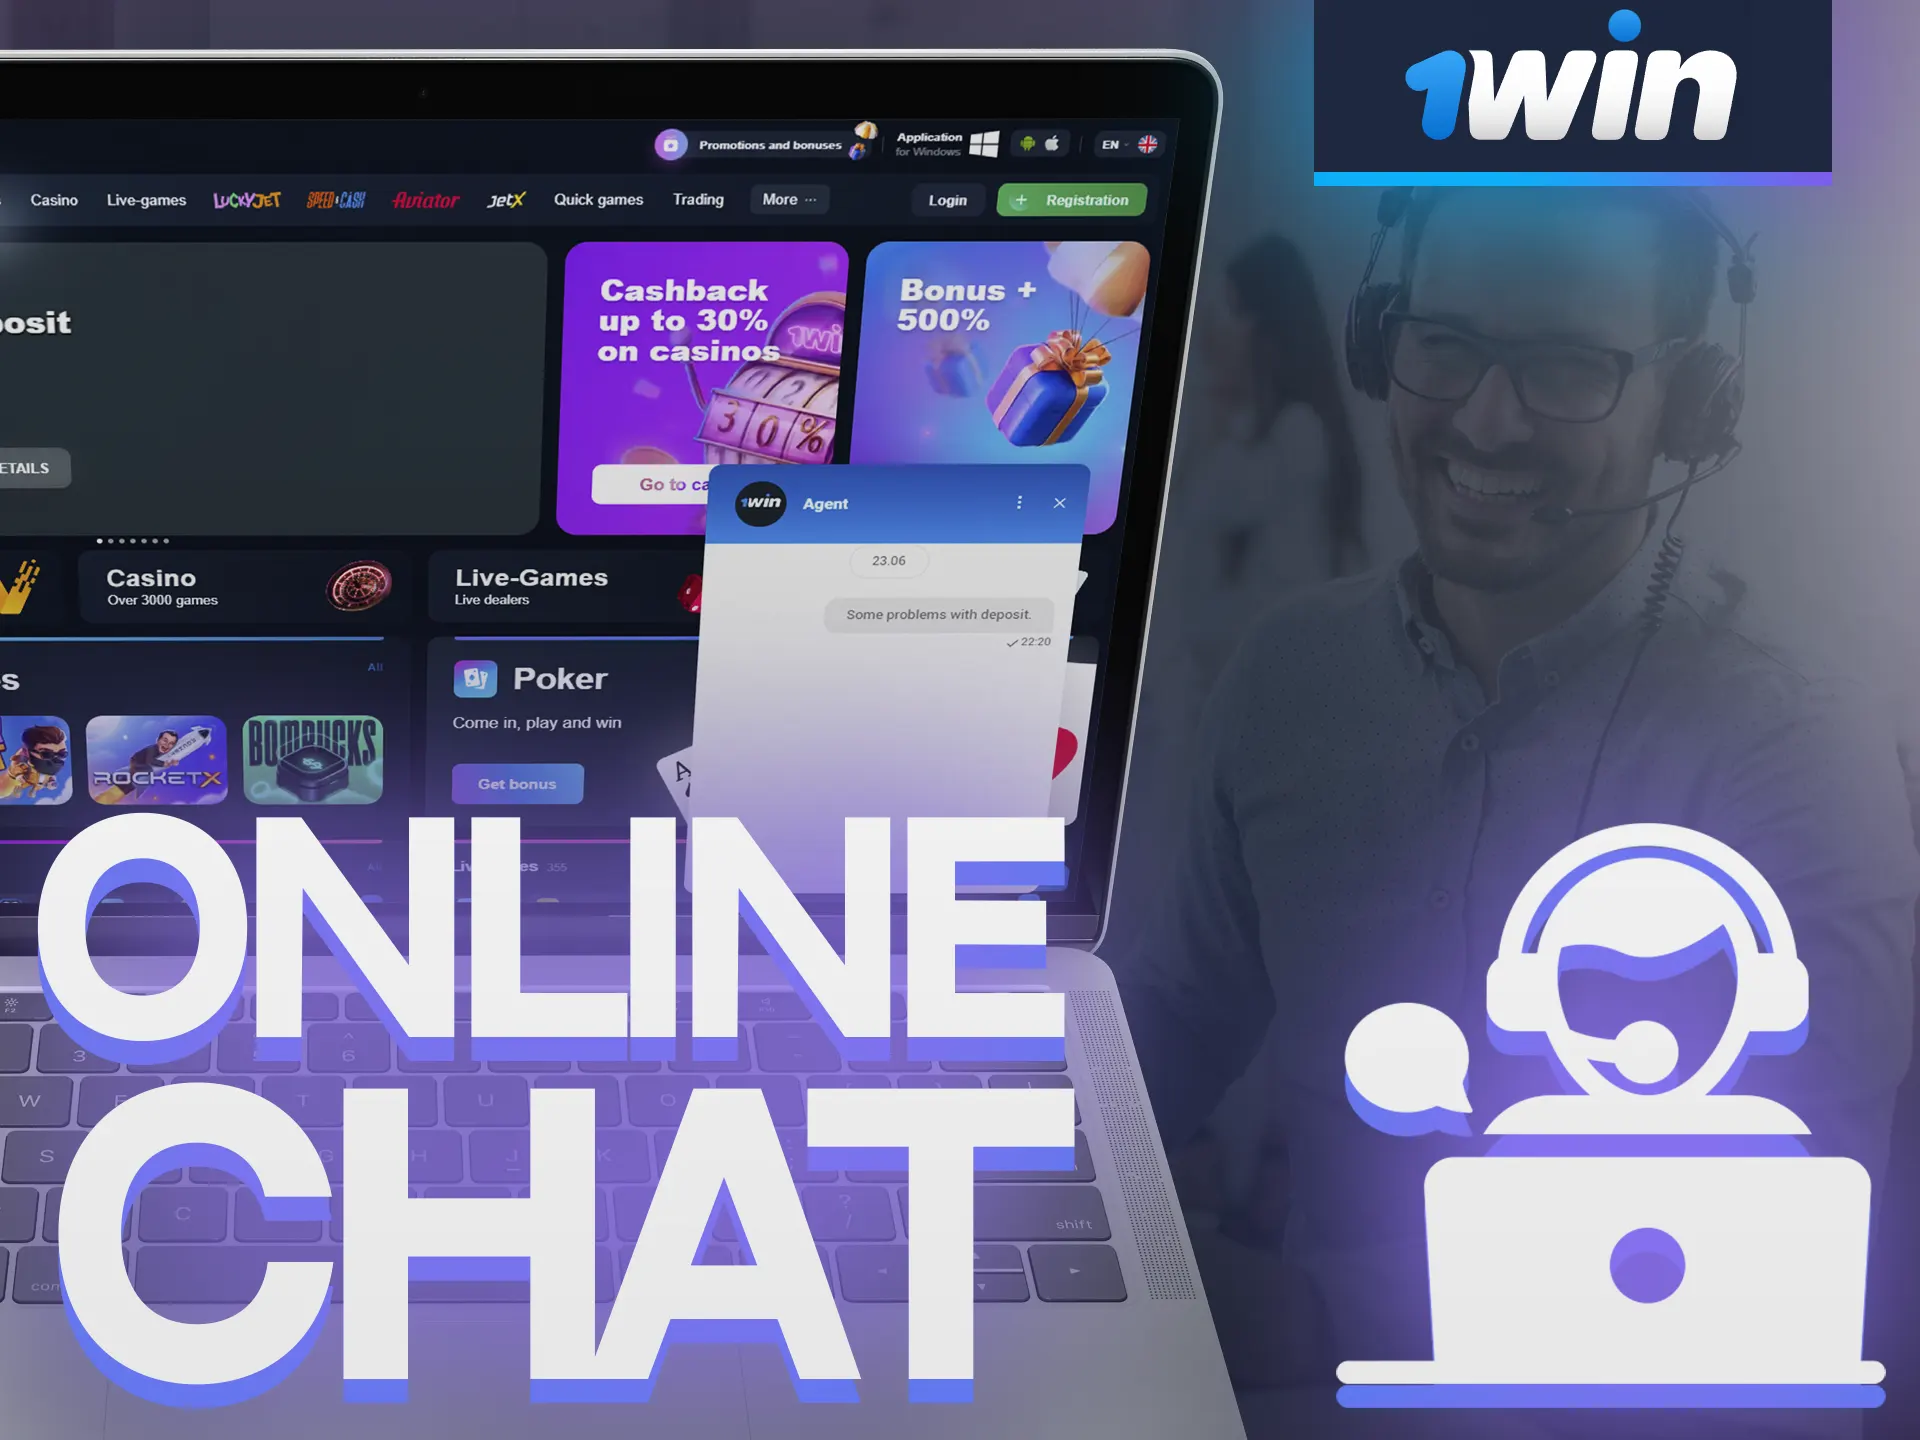 Ask your questions in the online chat on the website and in the 1Win app.